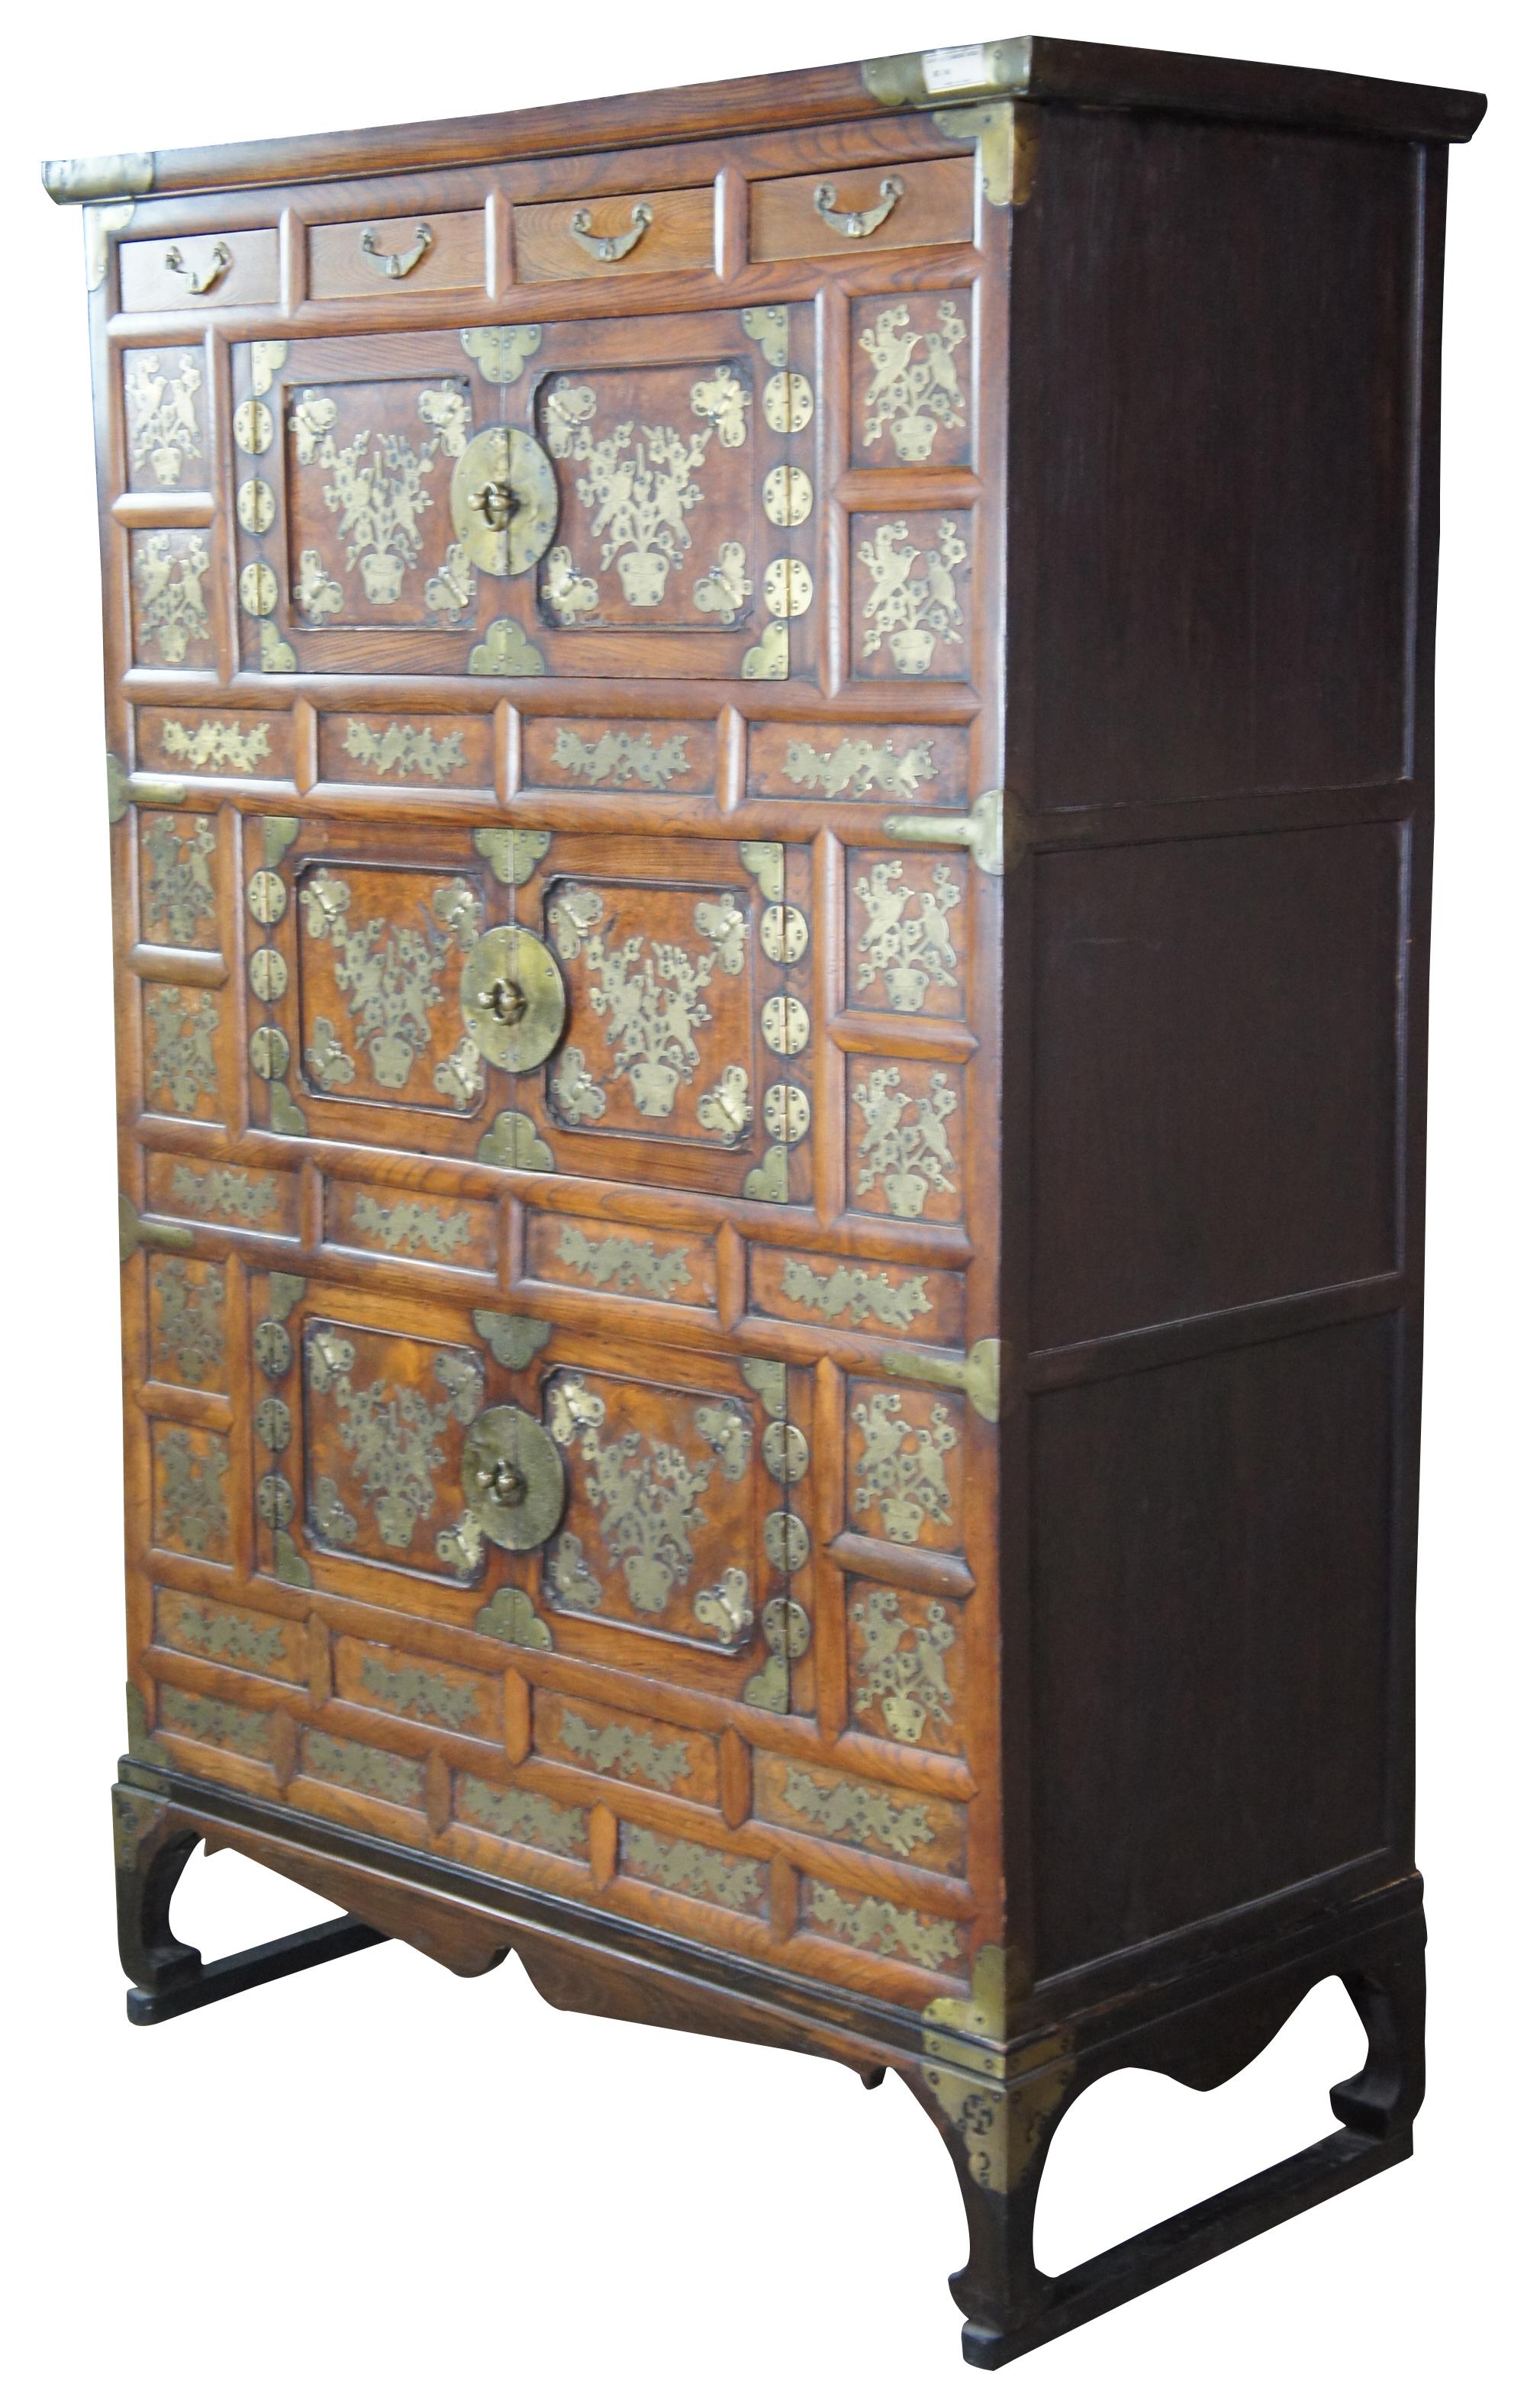 Fine & early 19th century Korean Tansu Nong Bandaji tallboy wedding chests or cabinet made of elmwood featuring ornate brass floral, butterfly, bird and sauwastika accents. The swastika symbol, ? (right-facing or clockwise) or ? (left-facing,